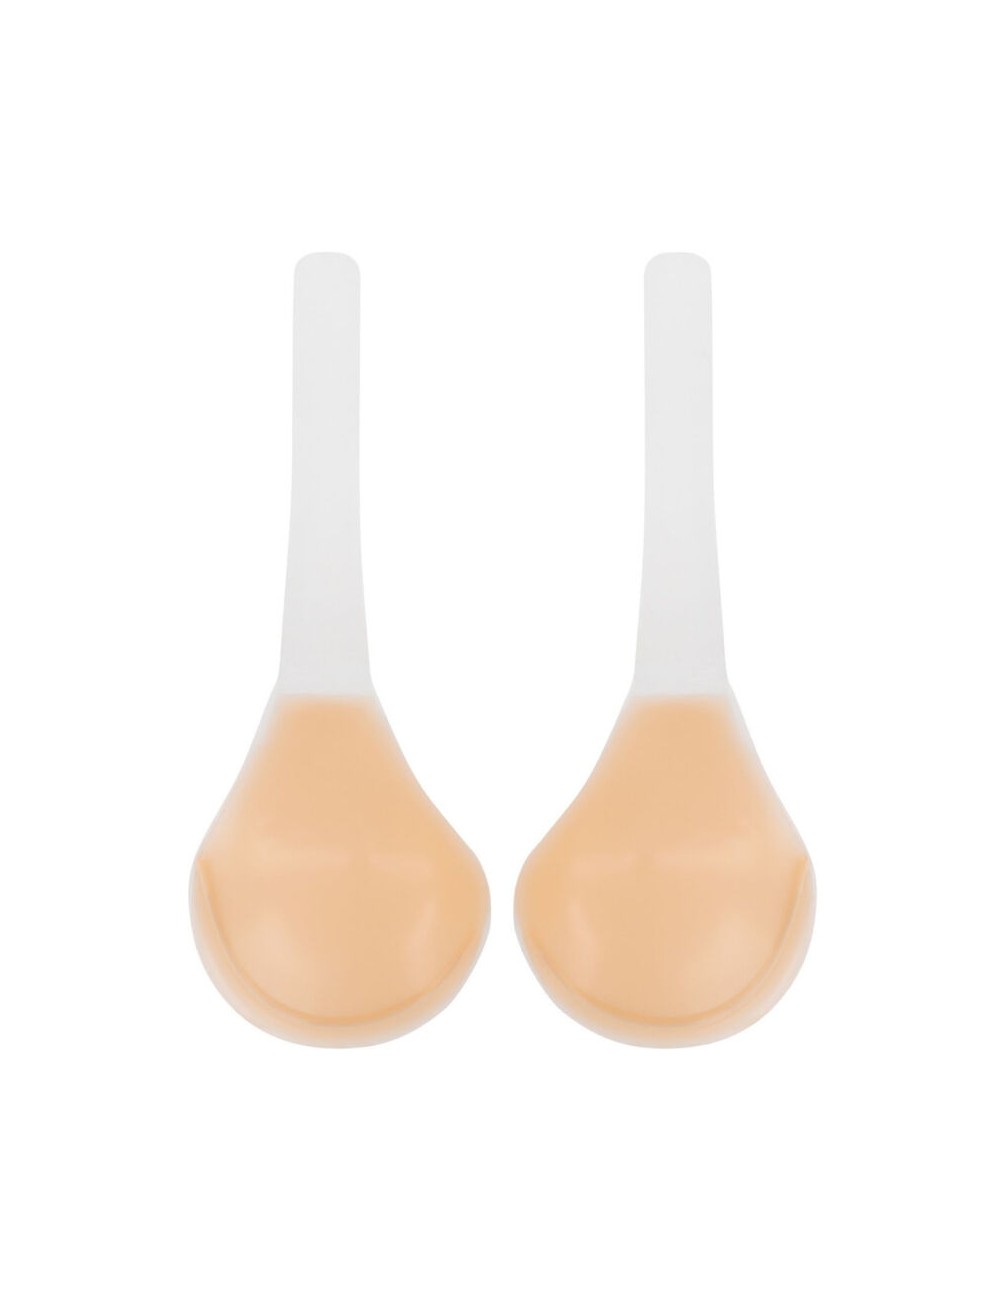 BYE BRA SCULPTING SILICONE LIFTS - SIZE G